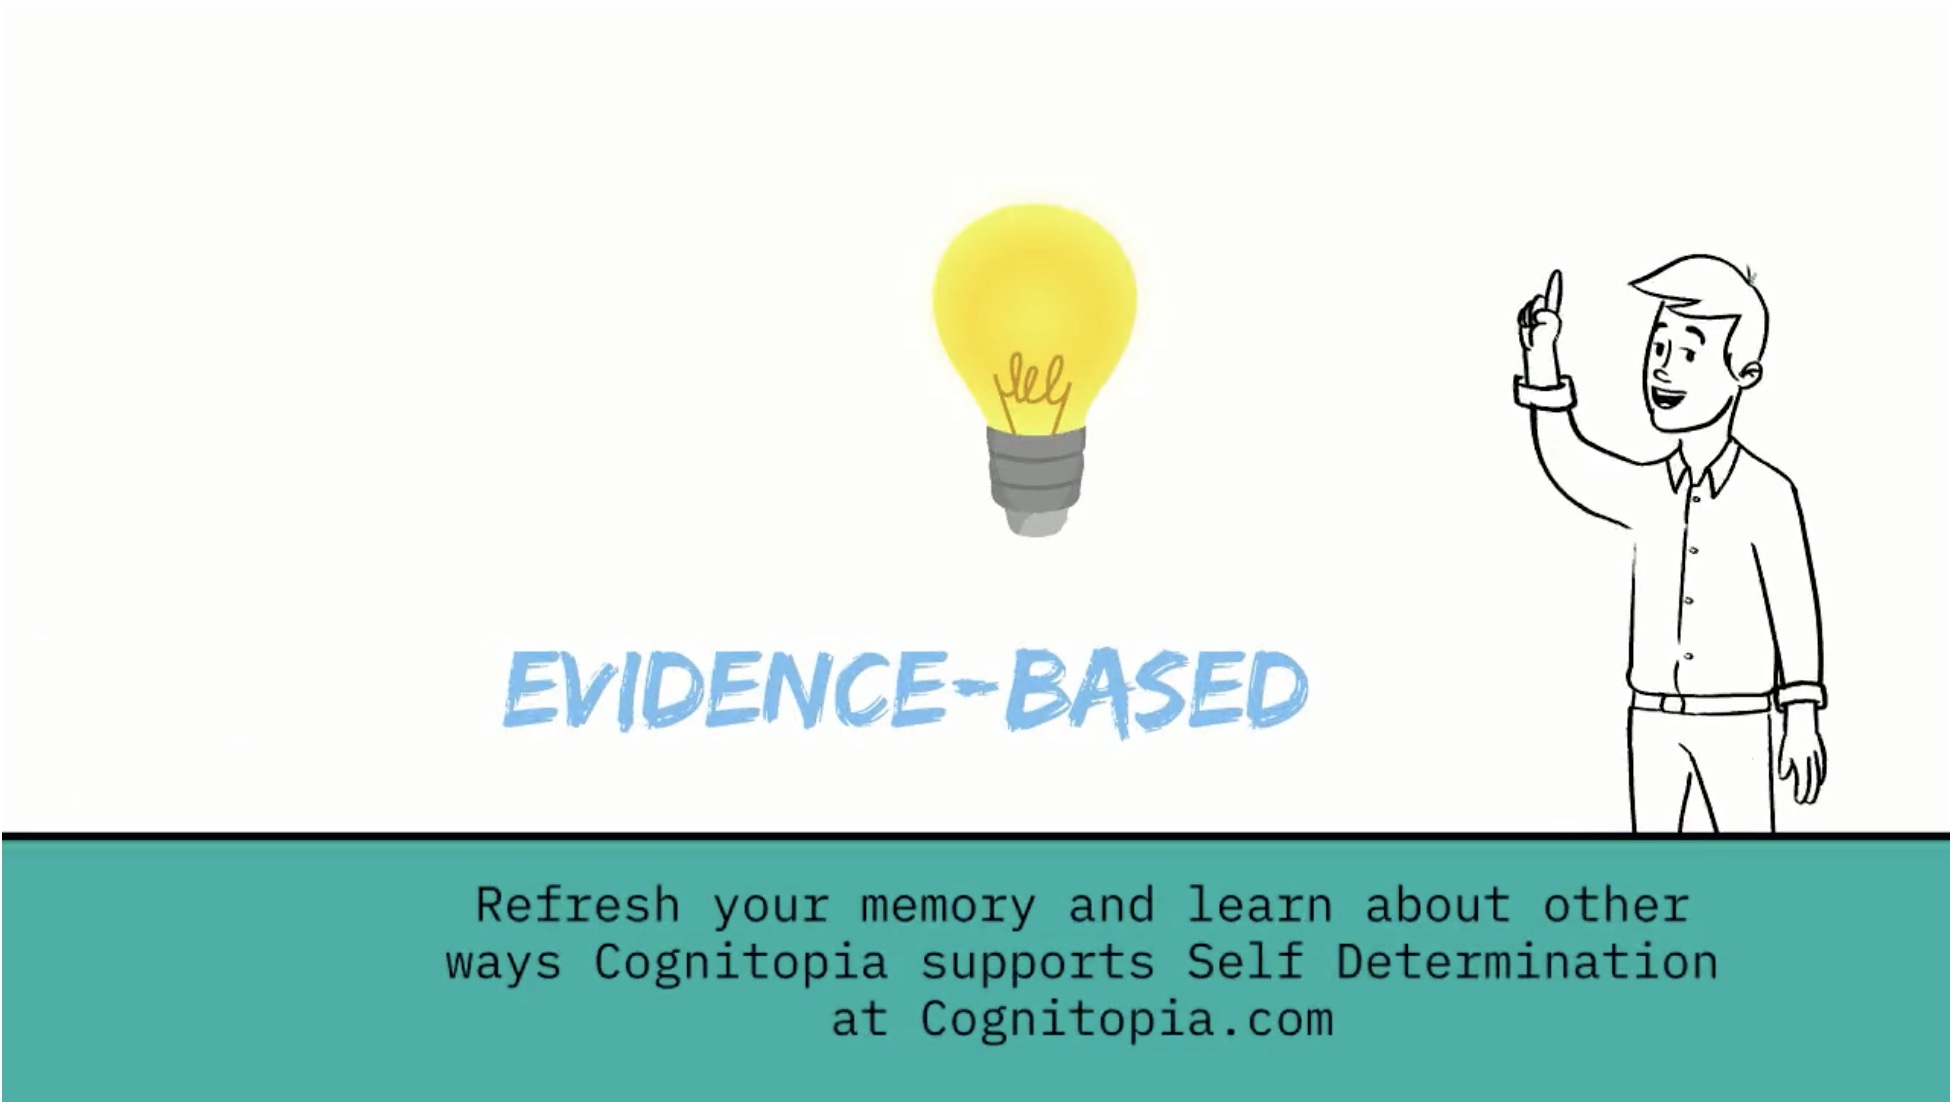 Image Referencing How Cognitopia was developed with Evidence Based Practices